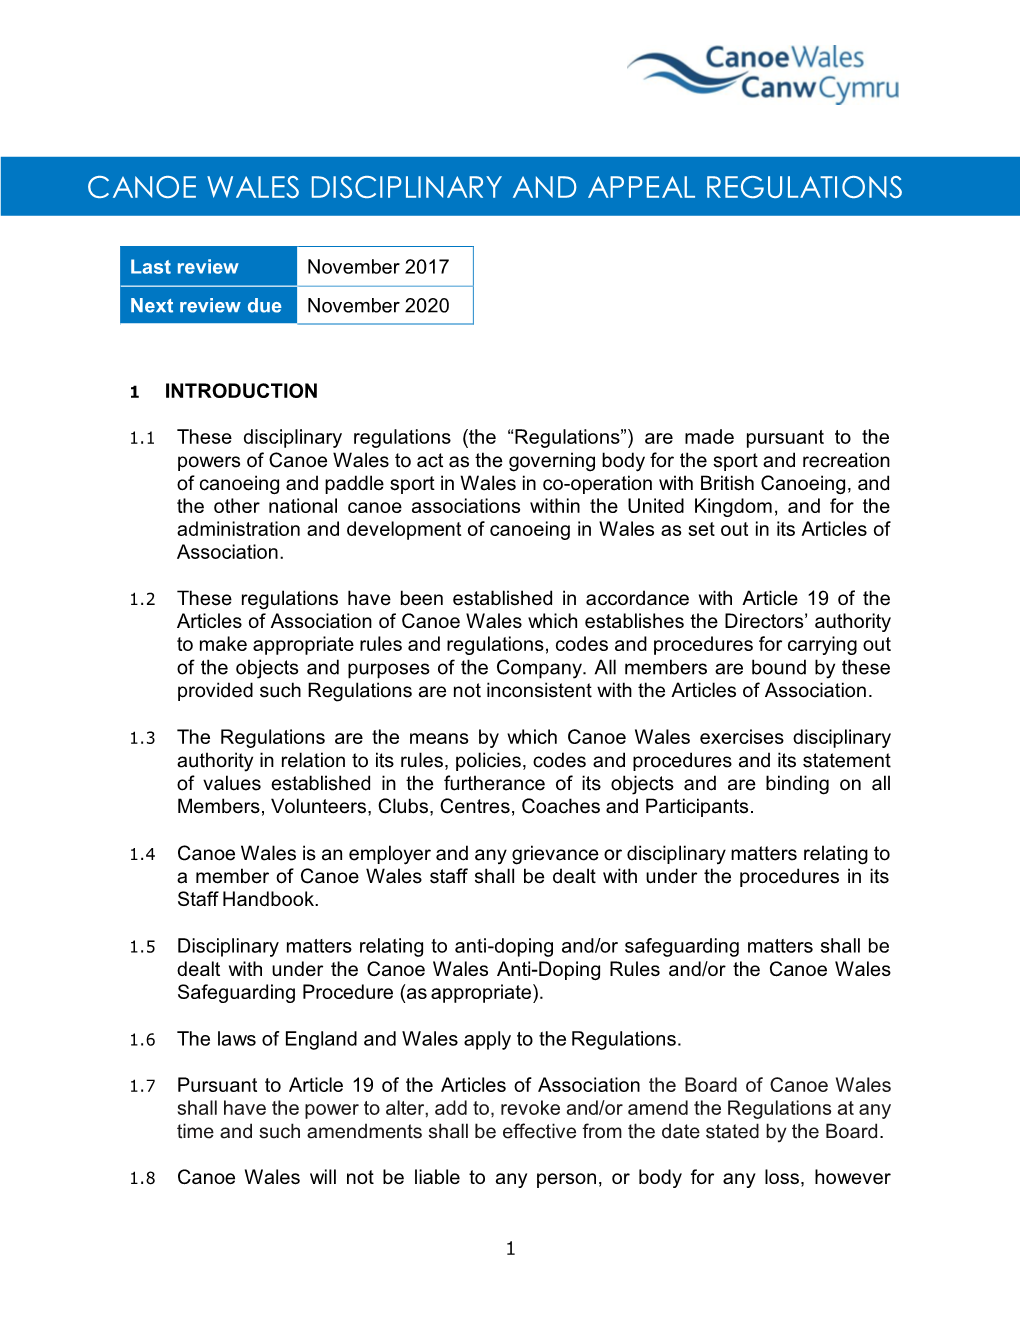 Canoe Wales Disciplinary and Appeal Regulations